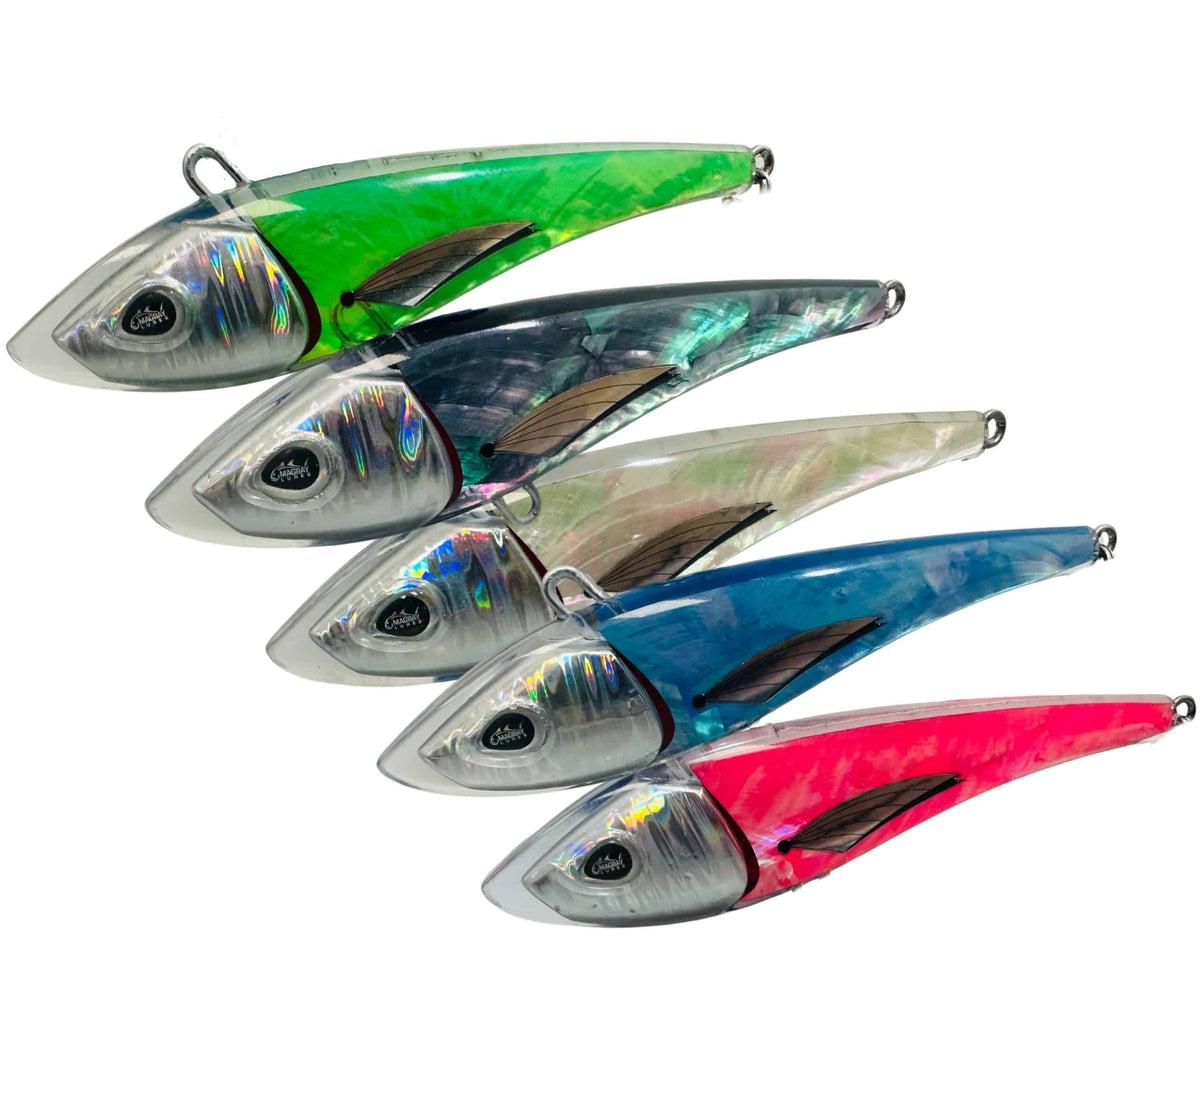 MagBay Resin Minnow Abalone UV 5 Casting Lures — Charkbait